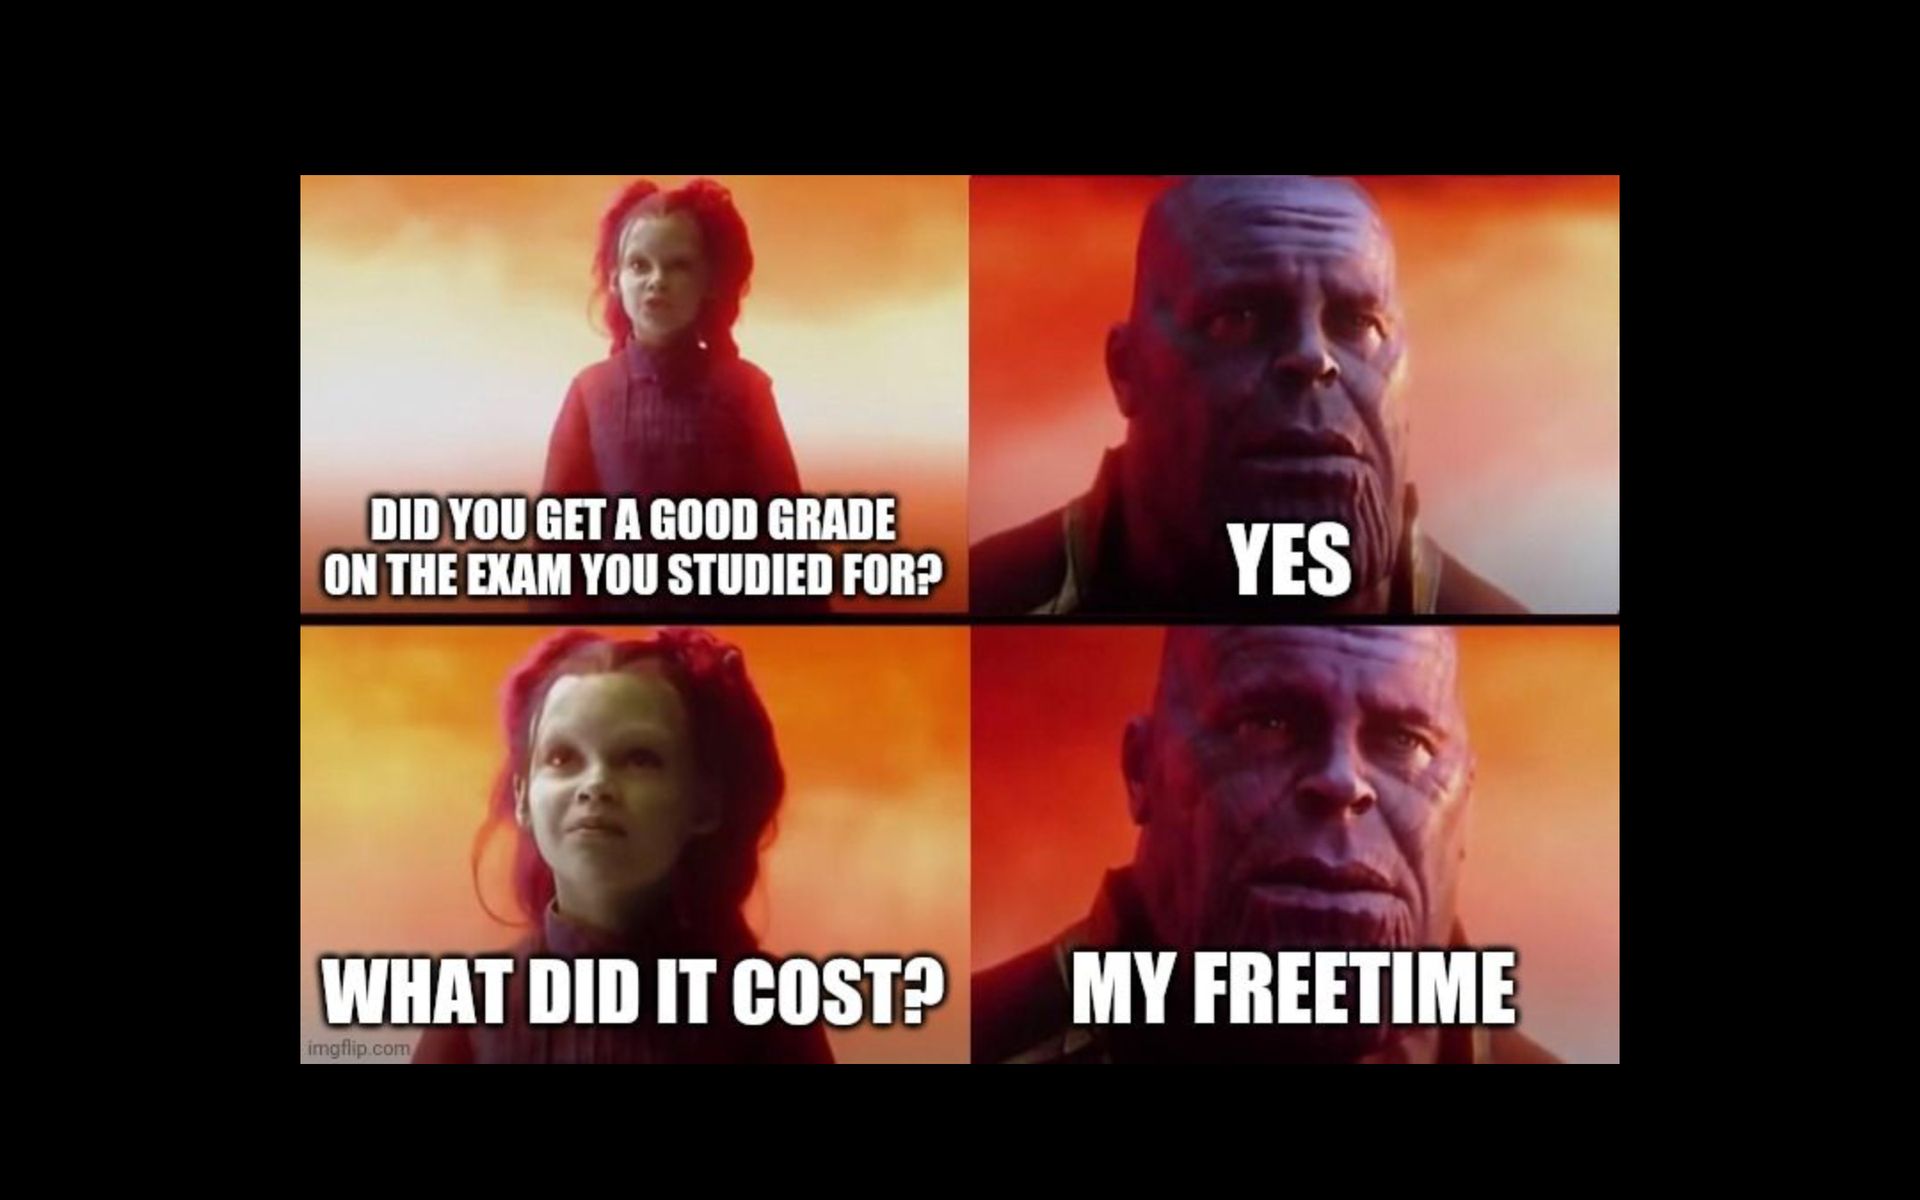 DID YOU GET A GOOD GRADE
ON THE EXAM YOU STUDIED FOR?
WHAT DID IT COST?

YES
MY FREETIME